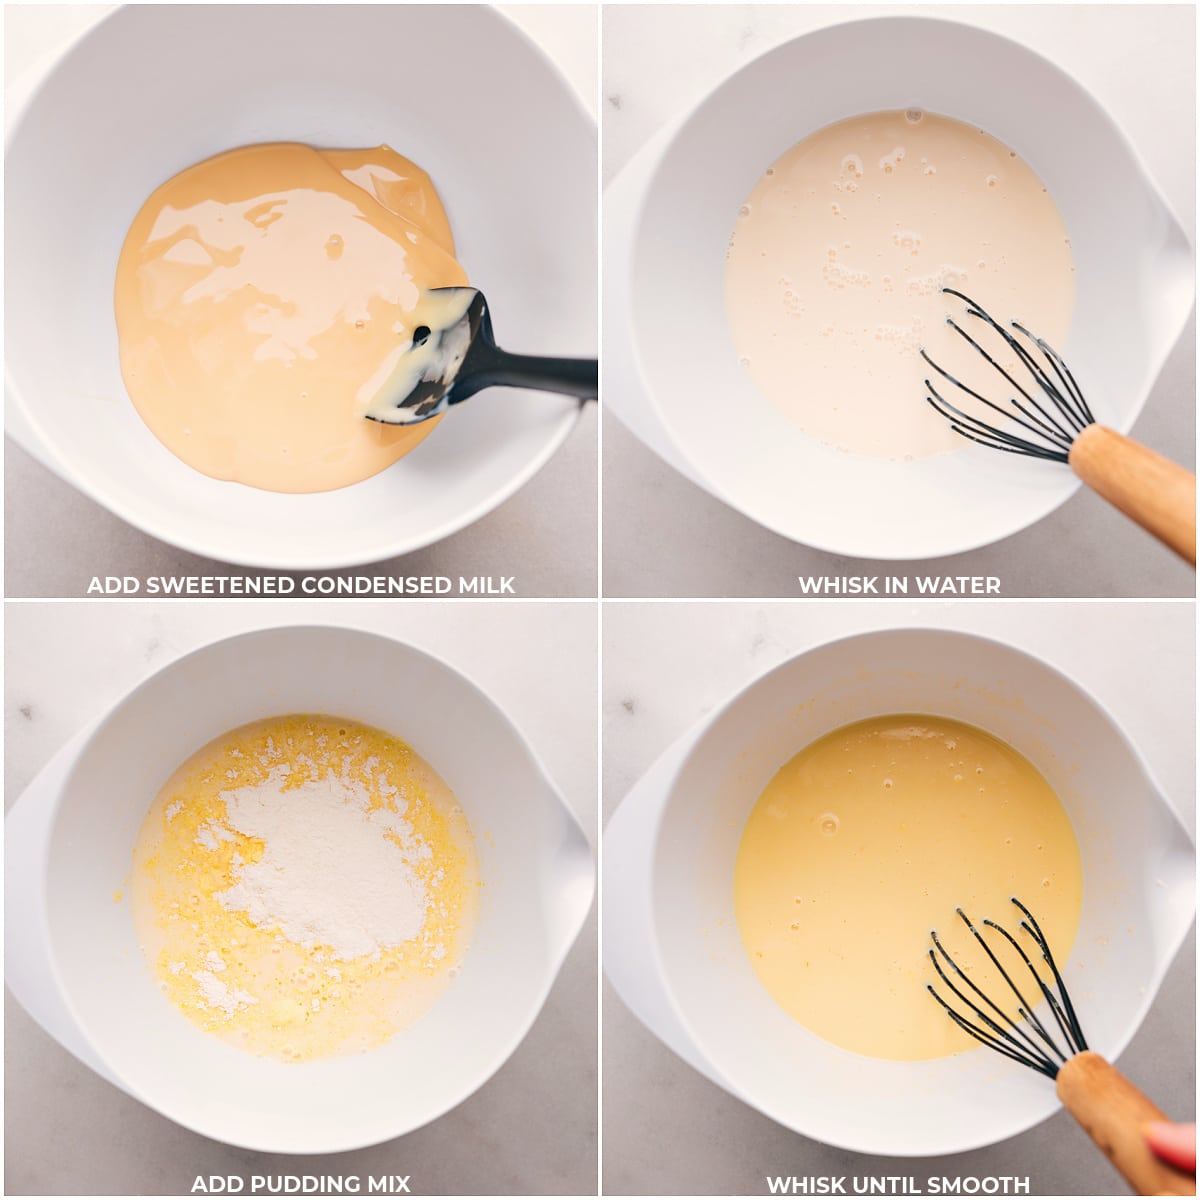 Sweetened condensed milk being added, followed by whisking in water, and then adding the pudding mix and whisking until smooth, the initial steps in preparing this easy banana pudding recipe.